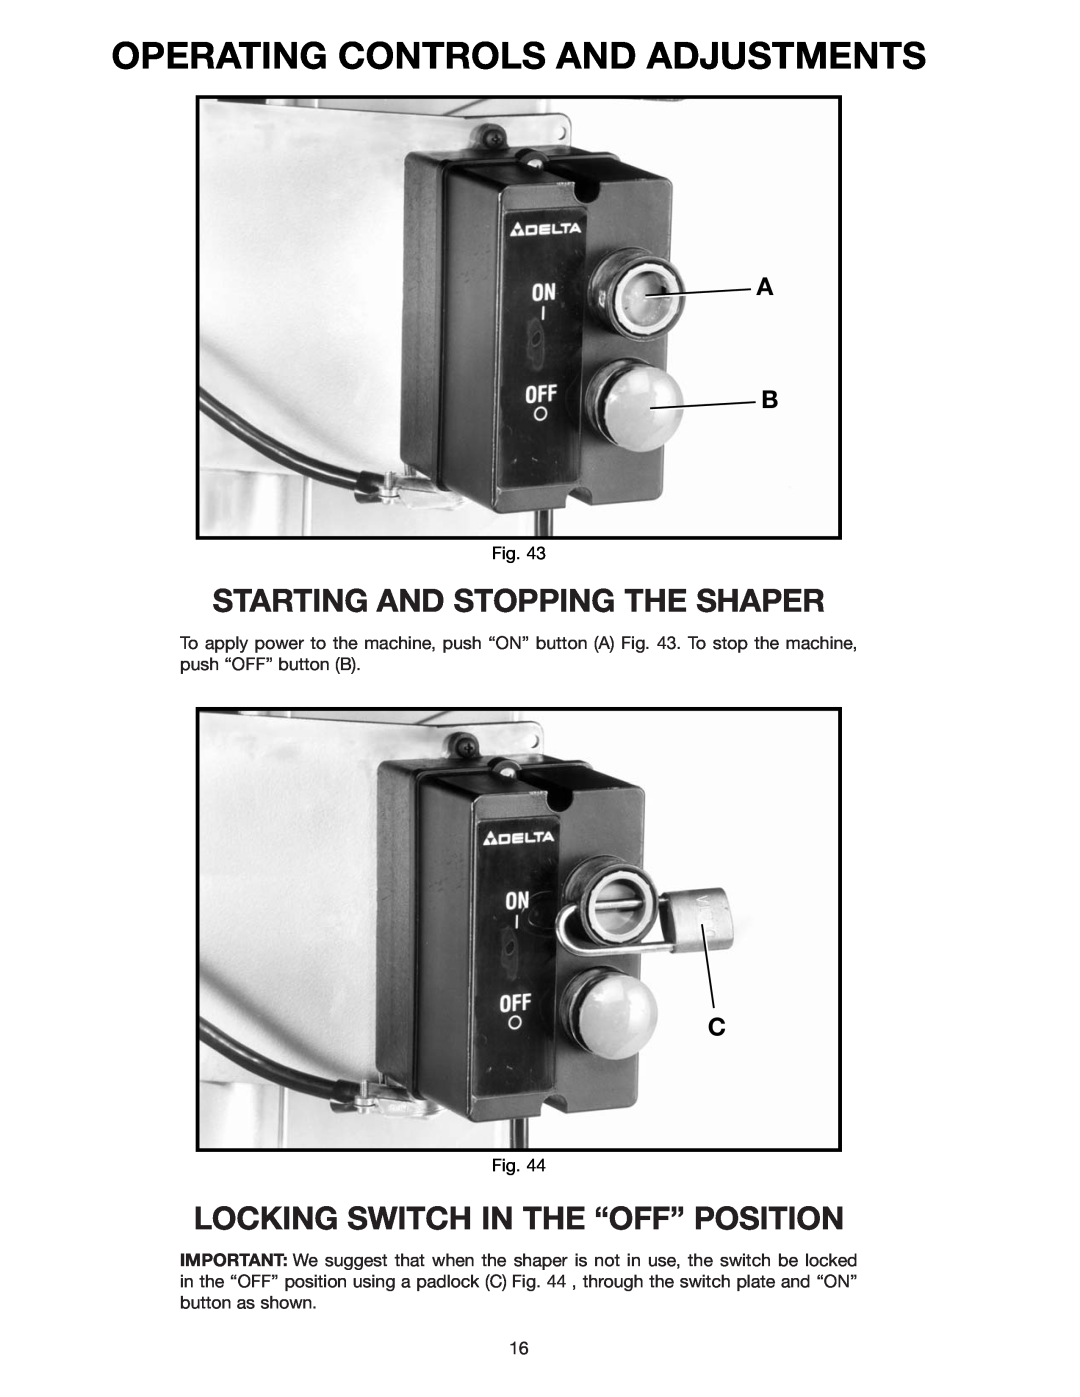 Delta 43-424 Operating Controls And Adjustments, Starting And Stopping The Shaper, Locking Switch In The “Off” Position 